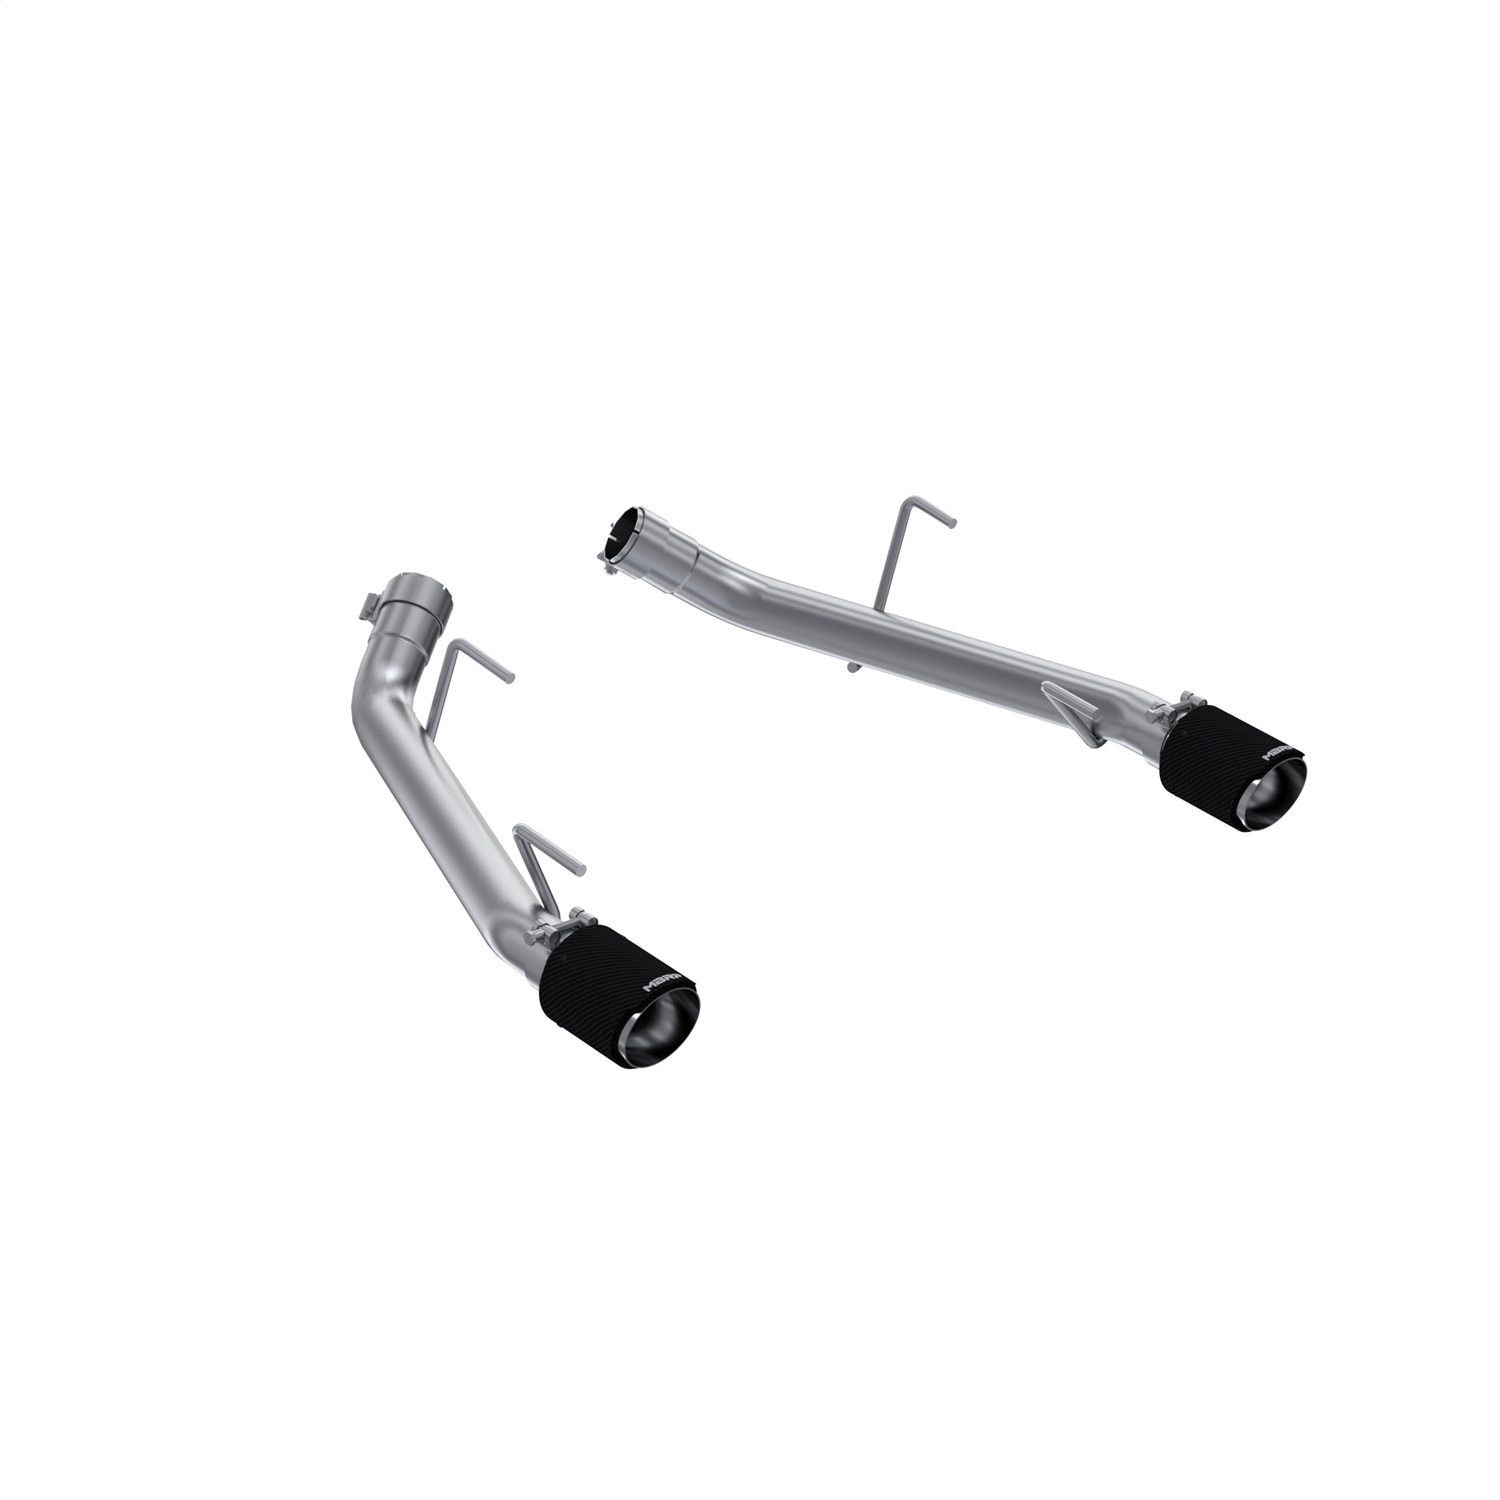 MBRP Exhaust S72023CF Armor Pro Axle Back Exhaust System Fits 05-10 Mustang